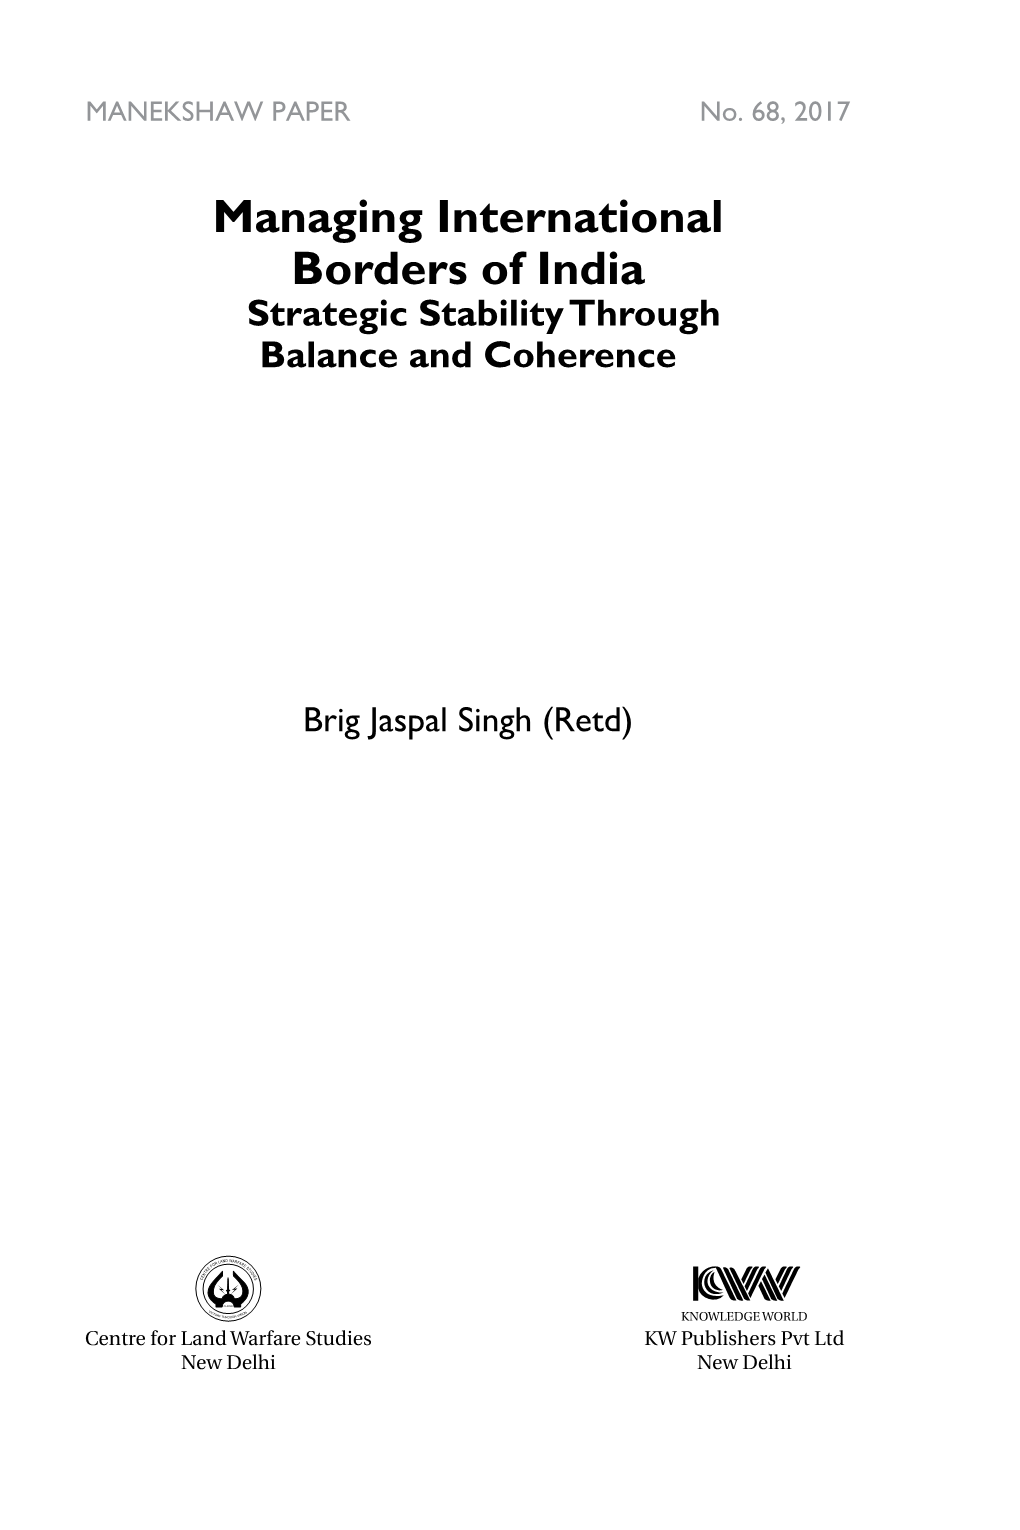 Managing International Borders of India Strategic Stability Through Balance and Coherence